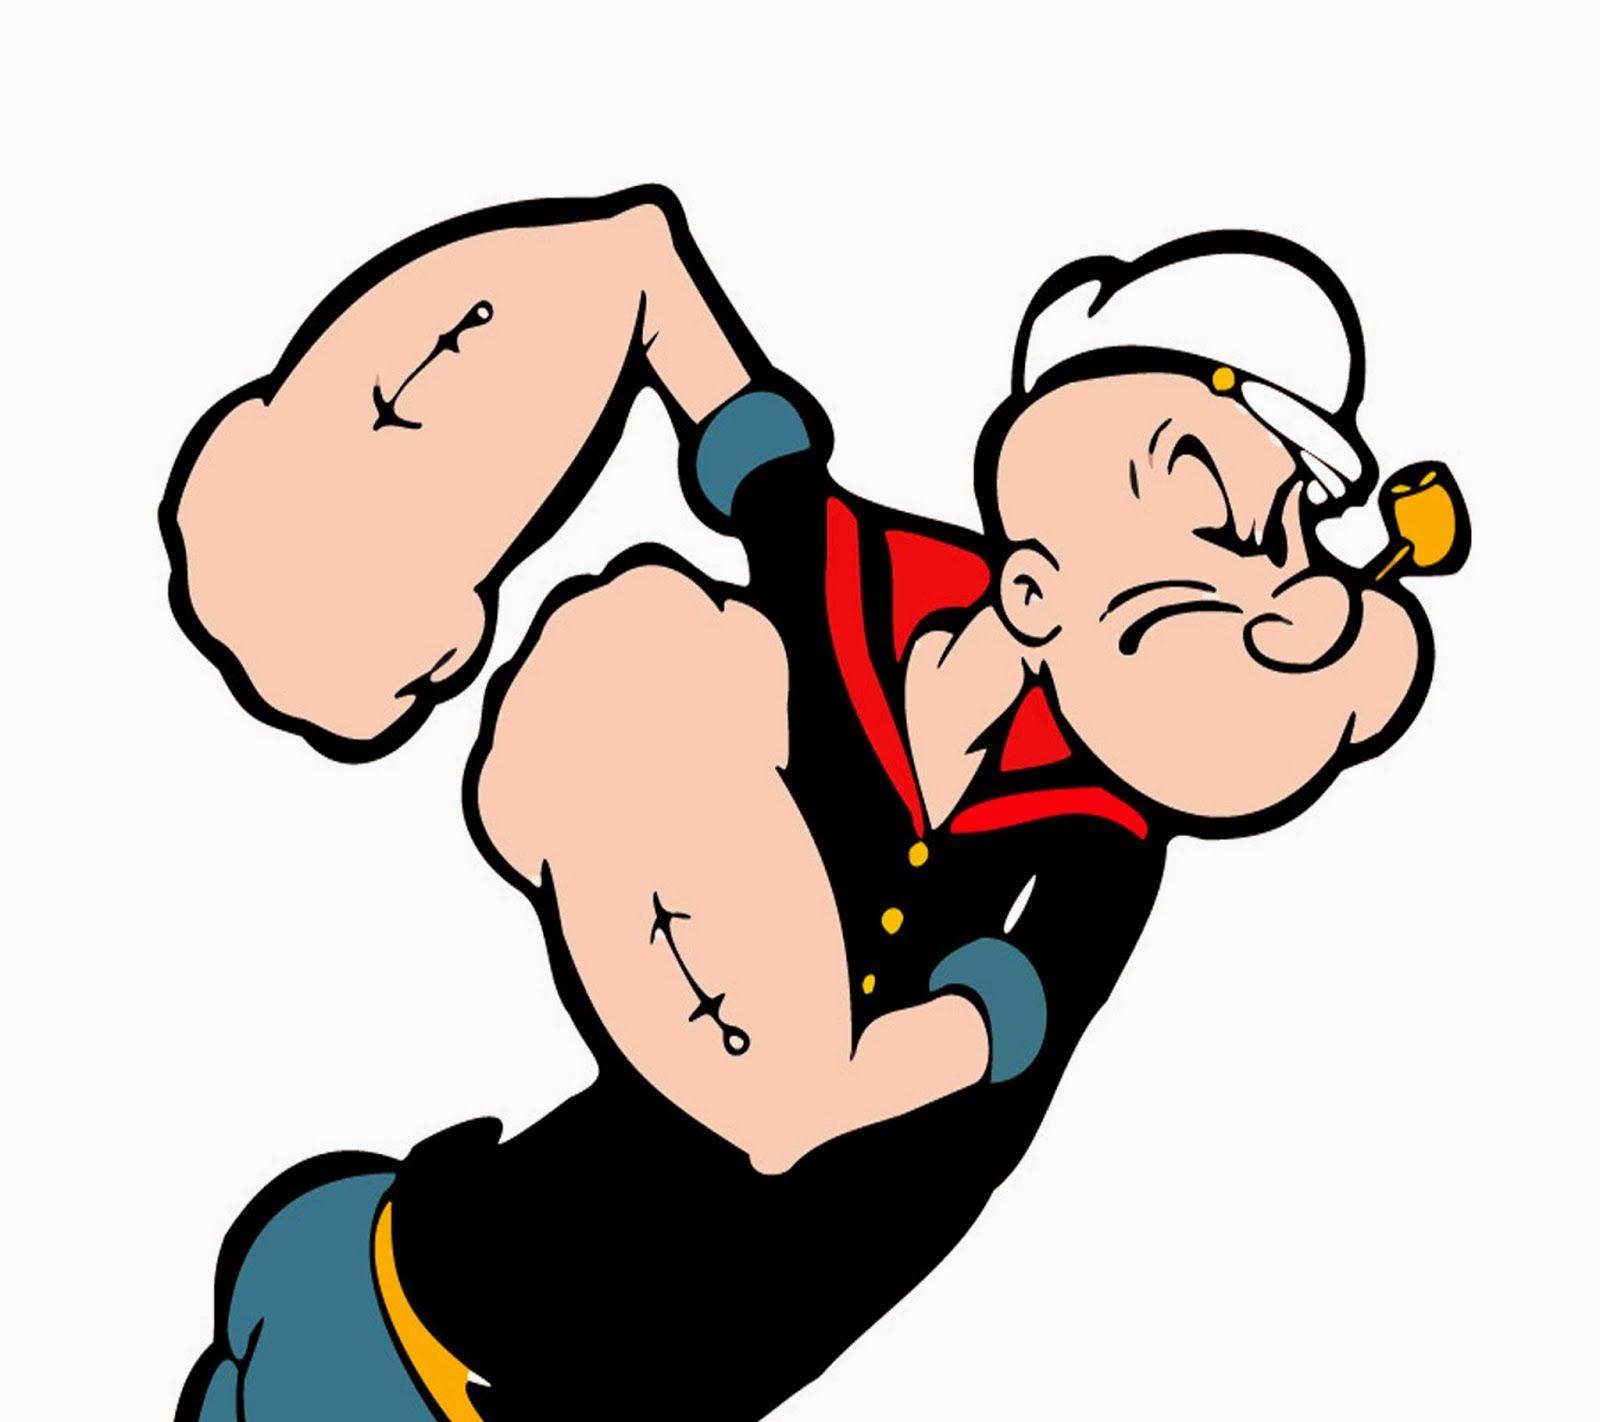 Popeye Wallpapers For PC.